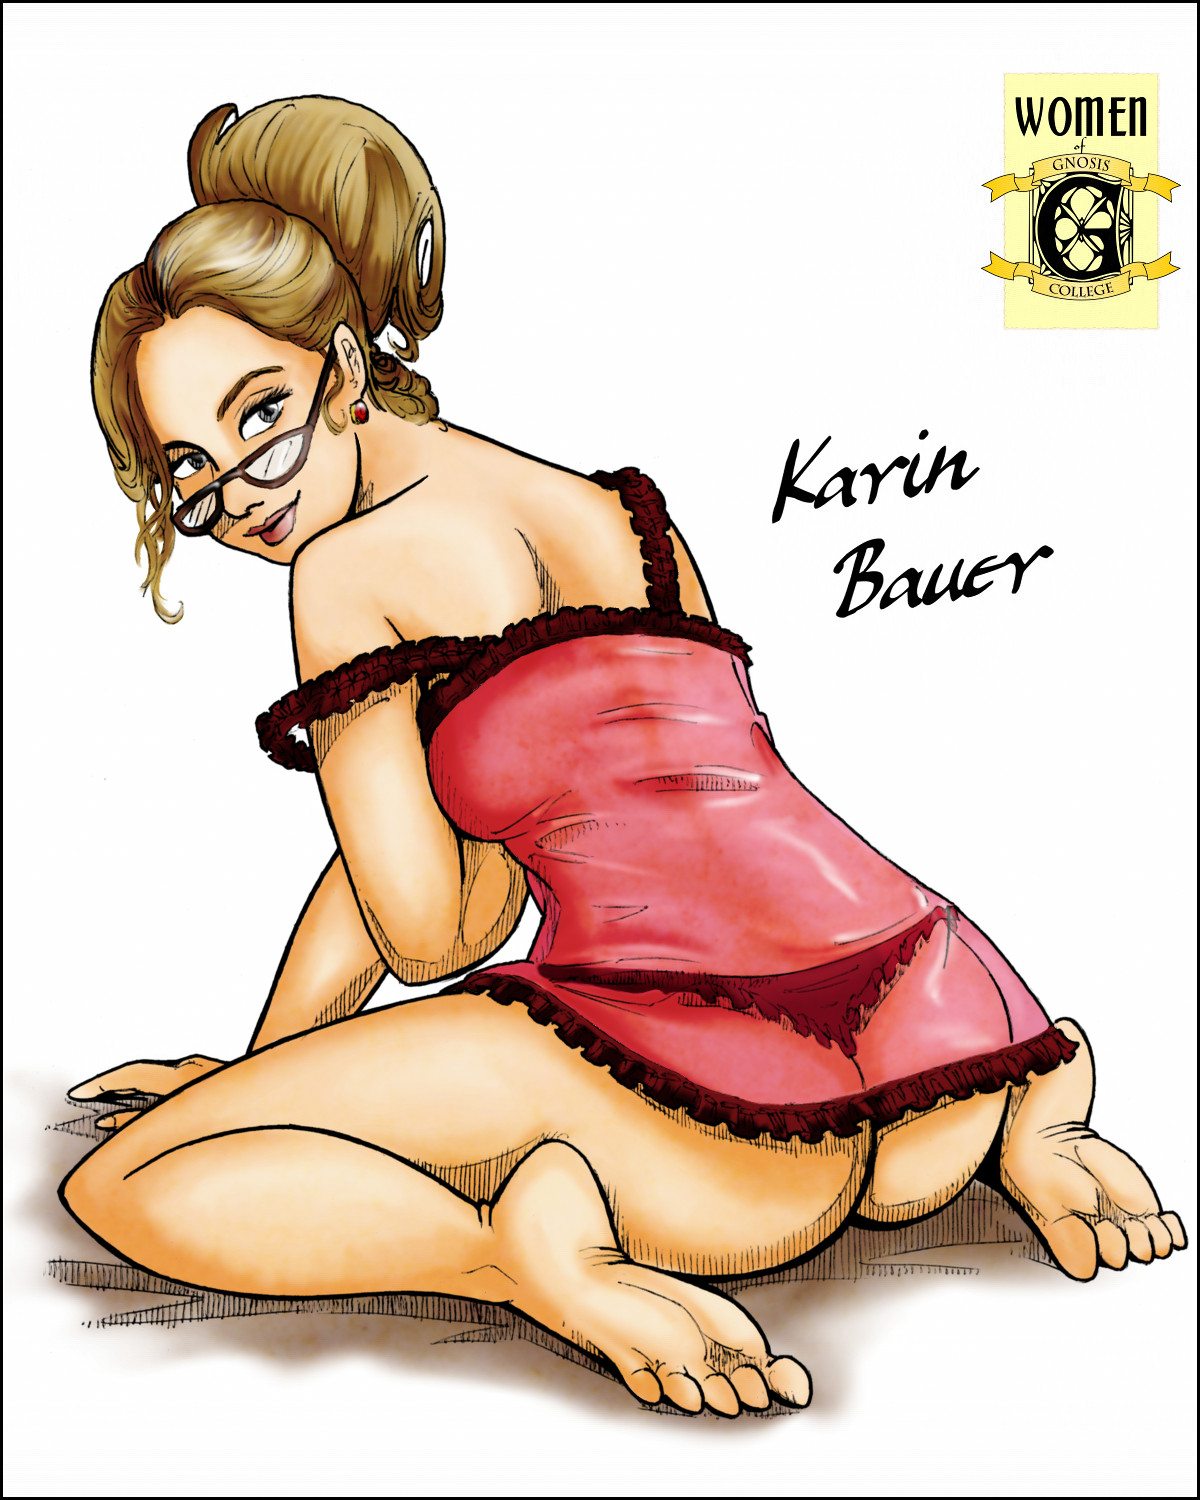 Karin Bauer is, of course, just a sweet and fleeting memory